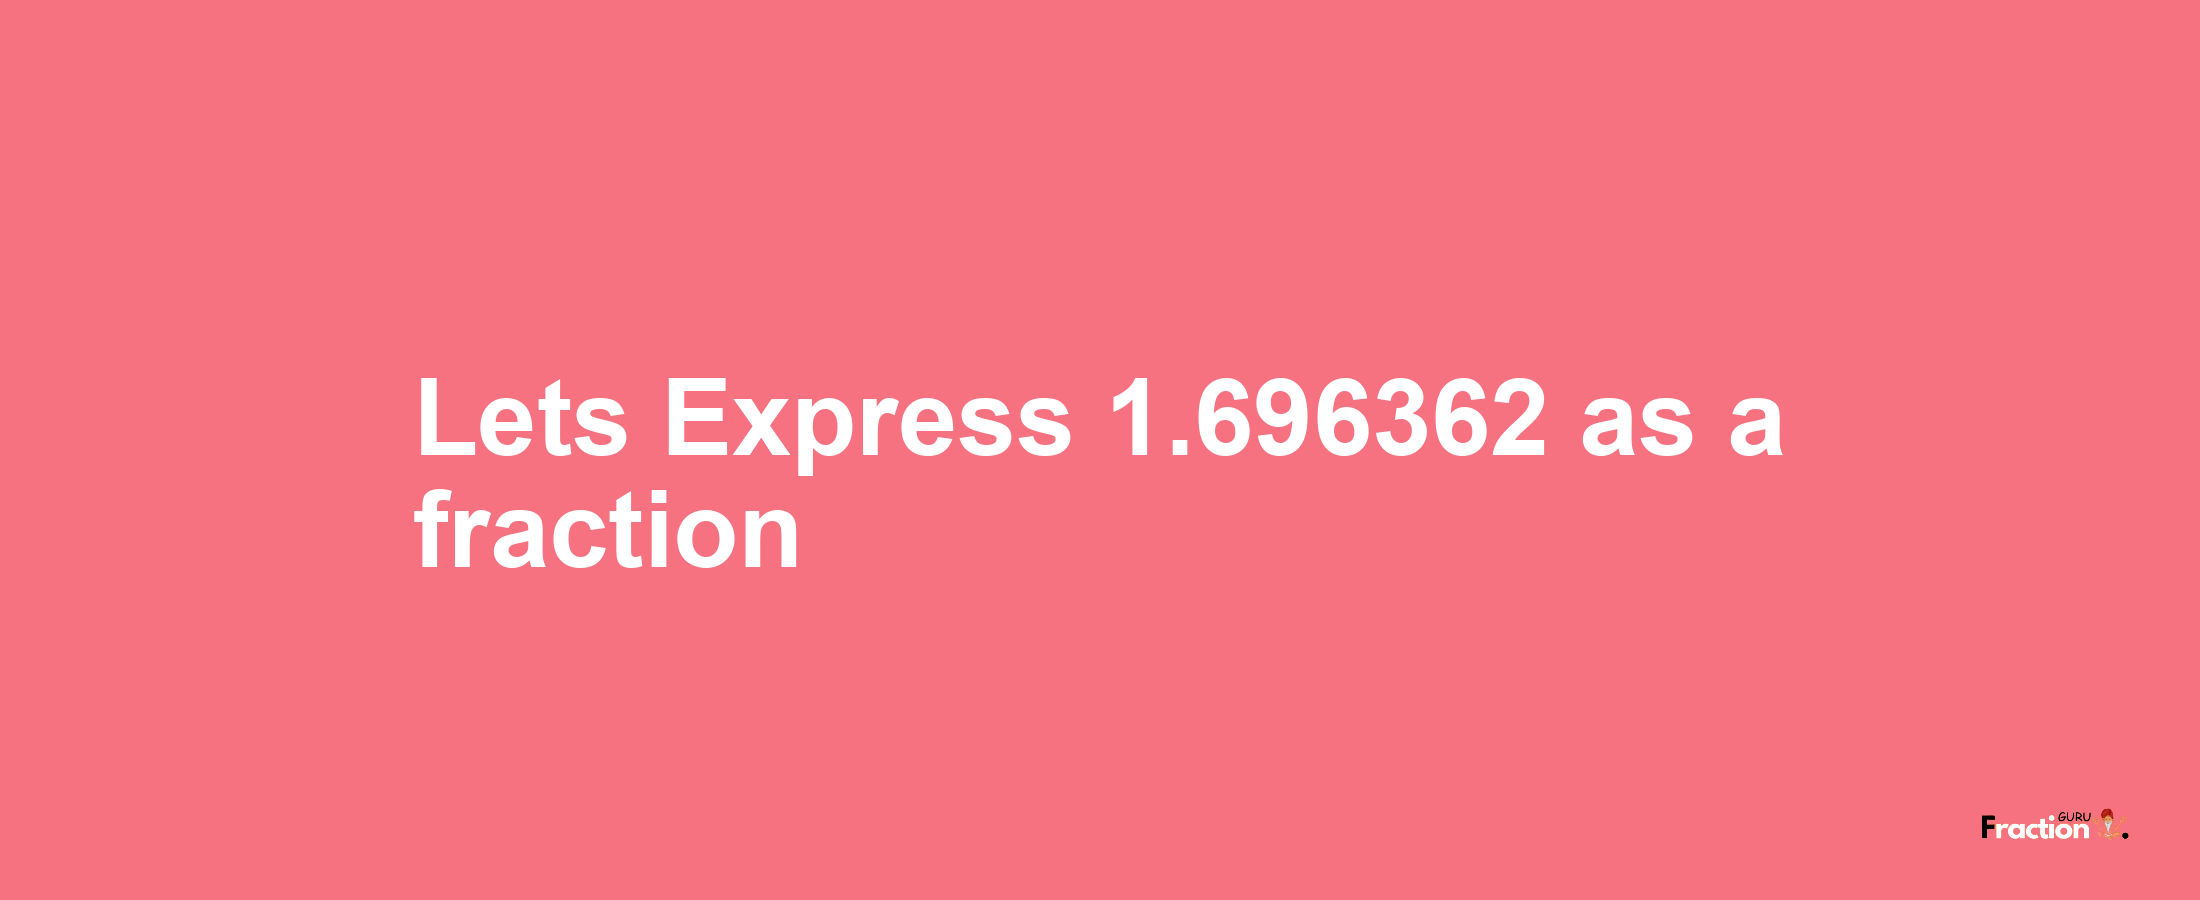 Lets Express 1.696362 as afraction